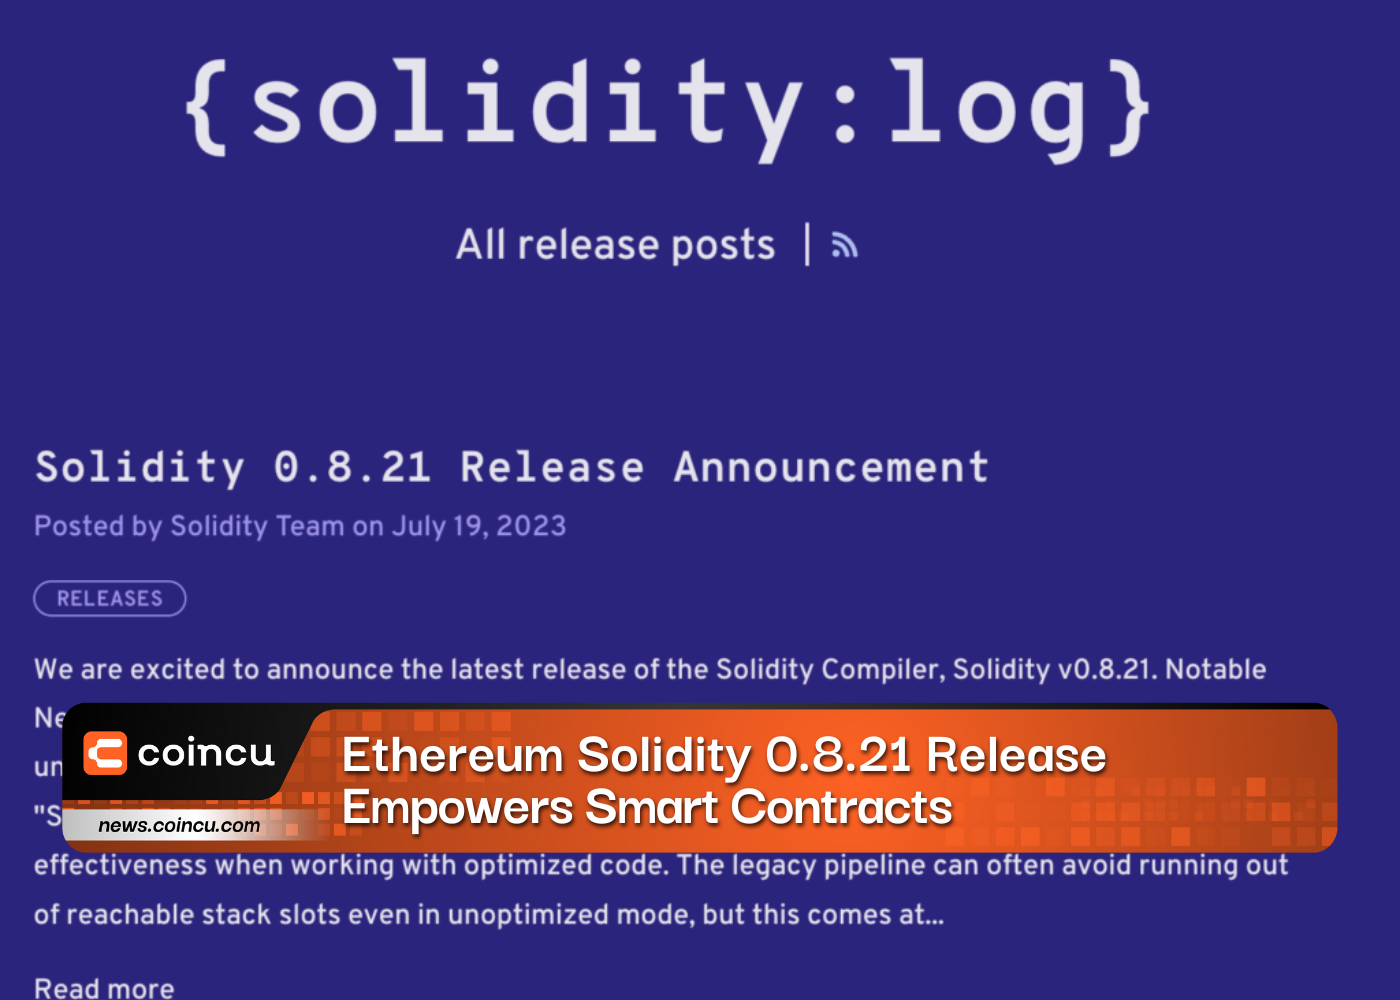 Ethereum Solidity 0.8.21 Release